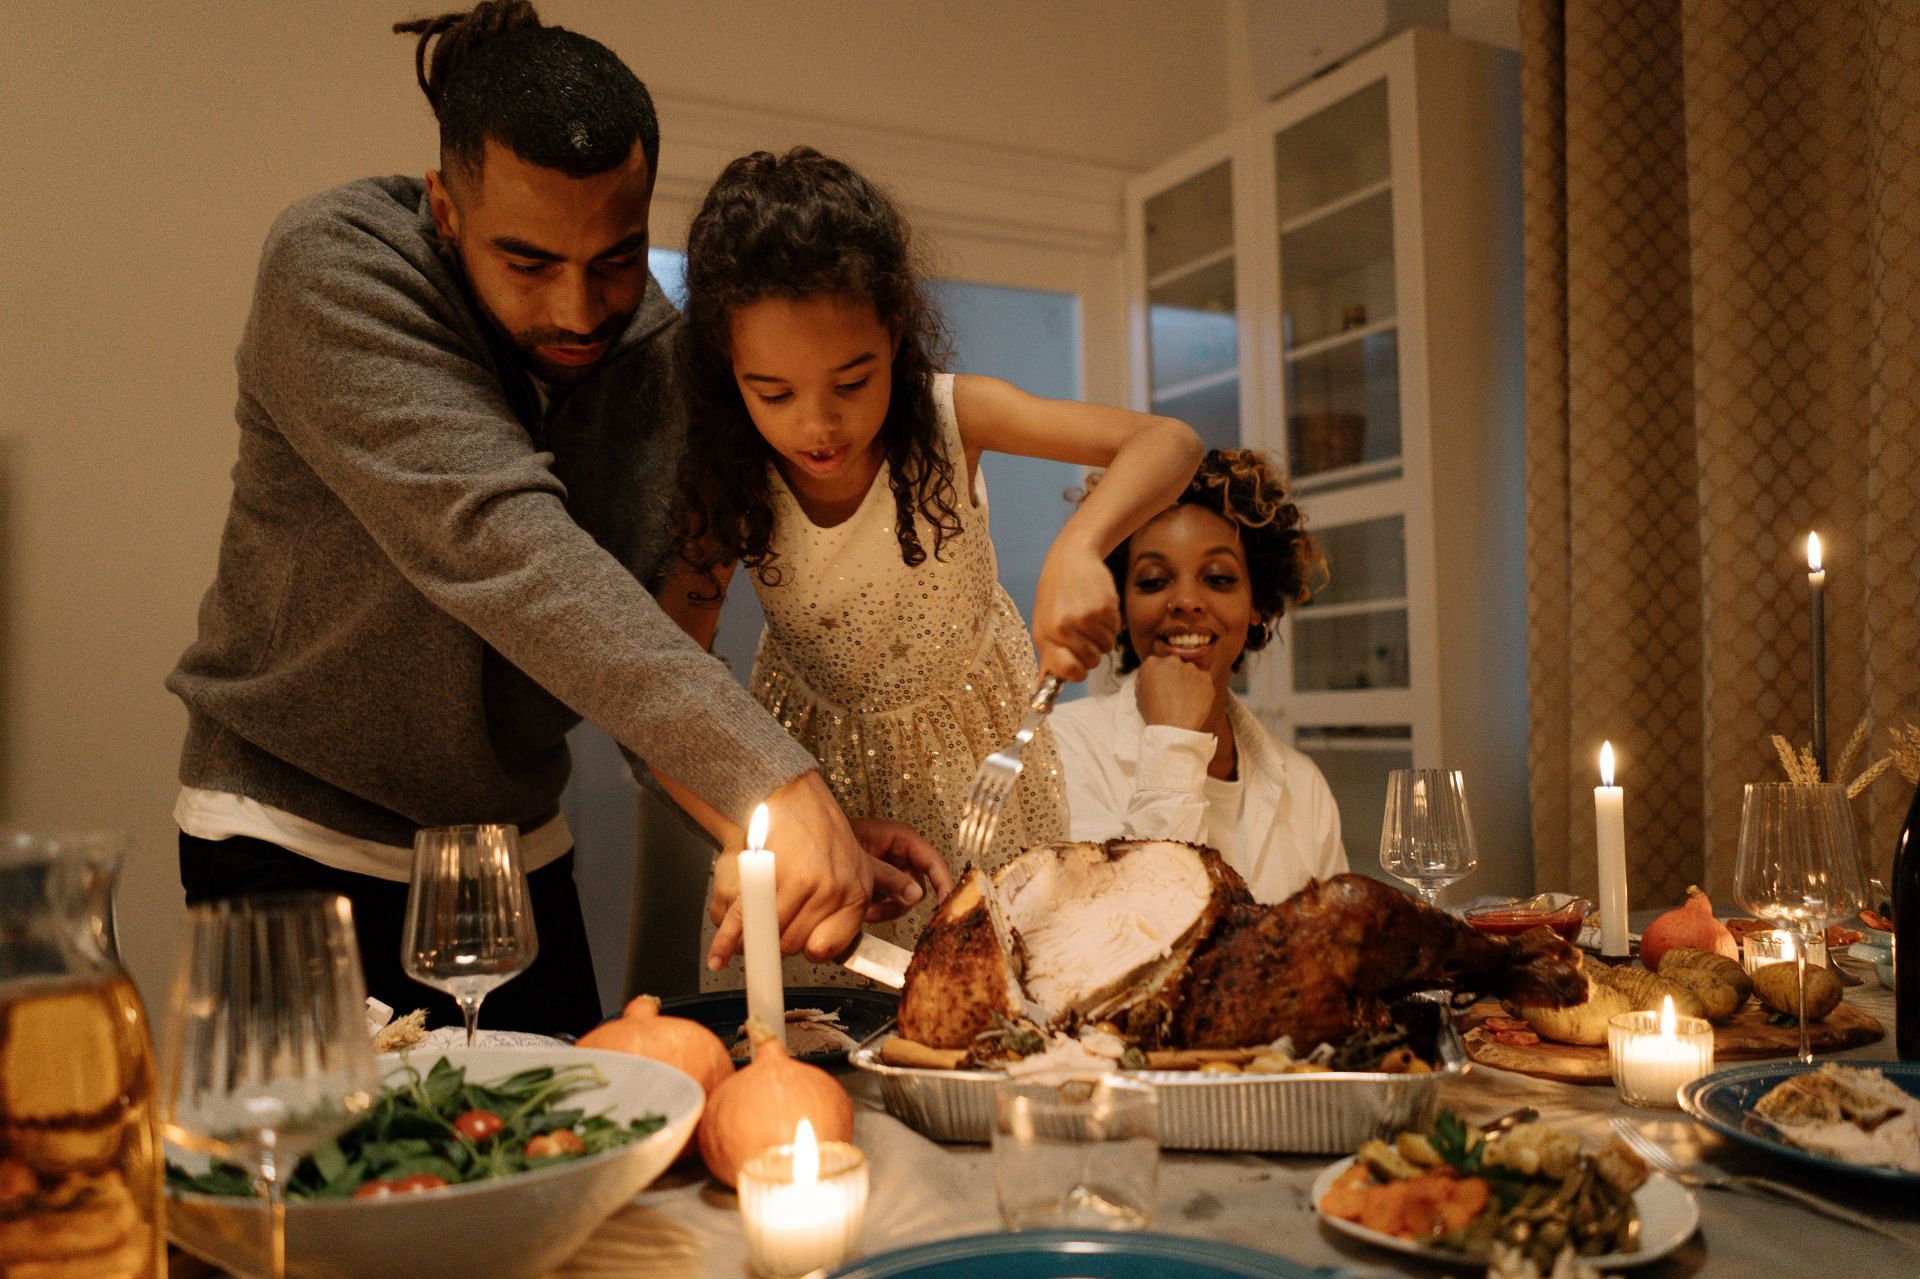 A big part of Thanksgiving is meal-time. (Image via Pexels/Cottonbro studio)